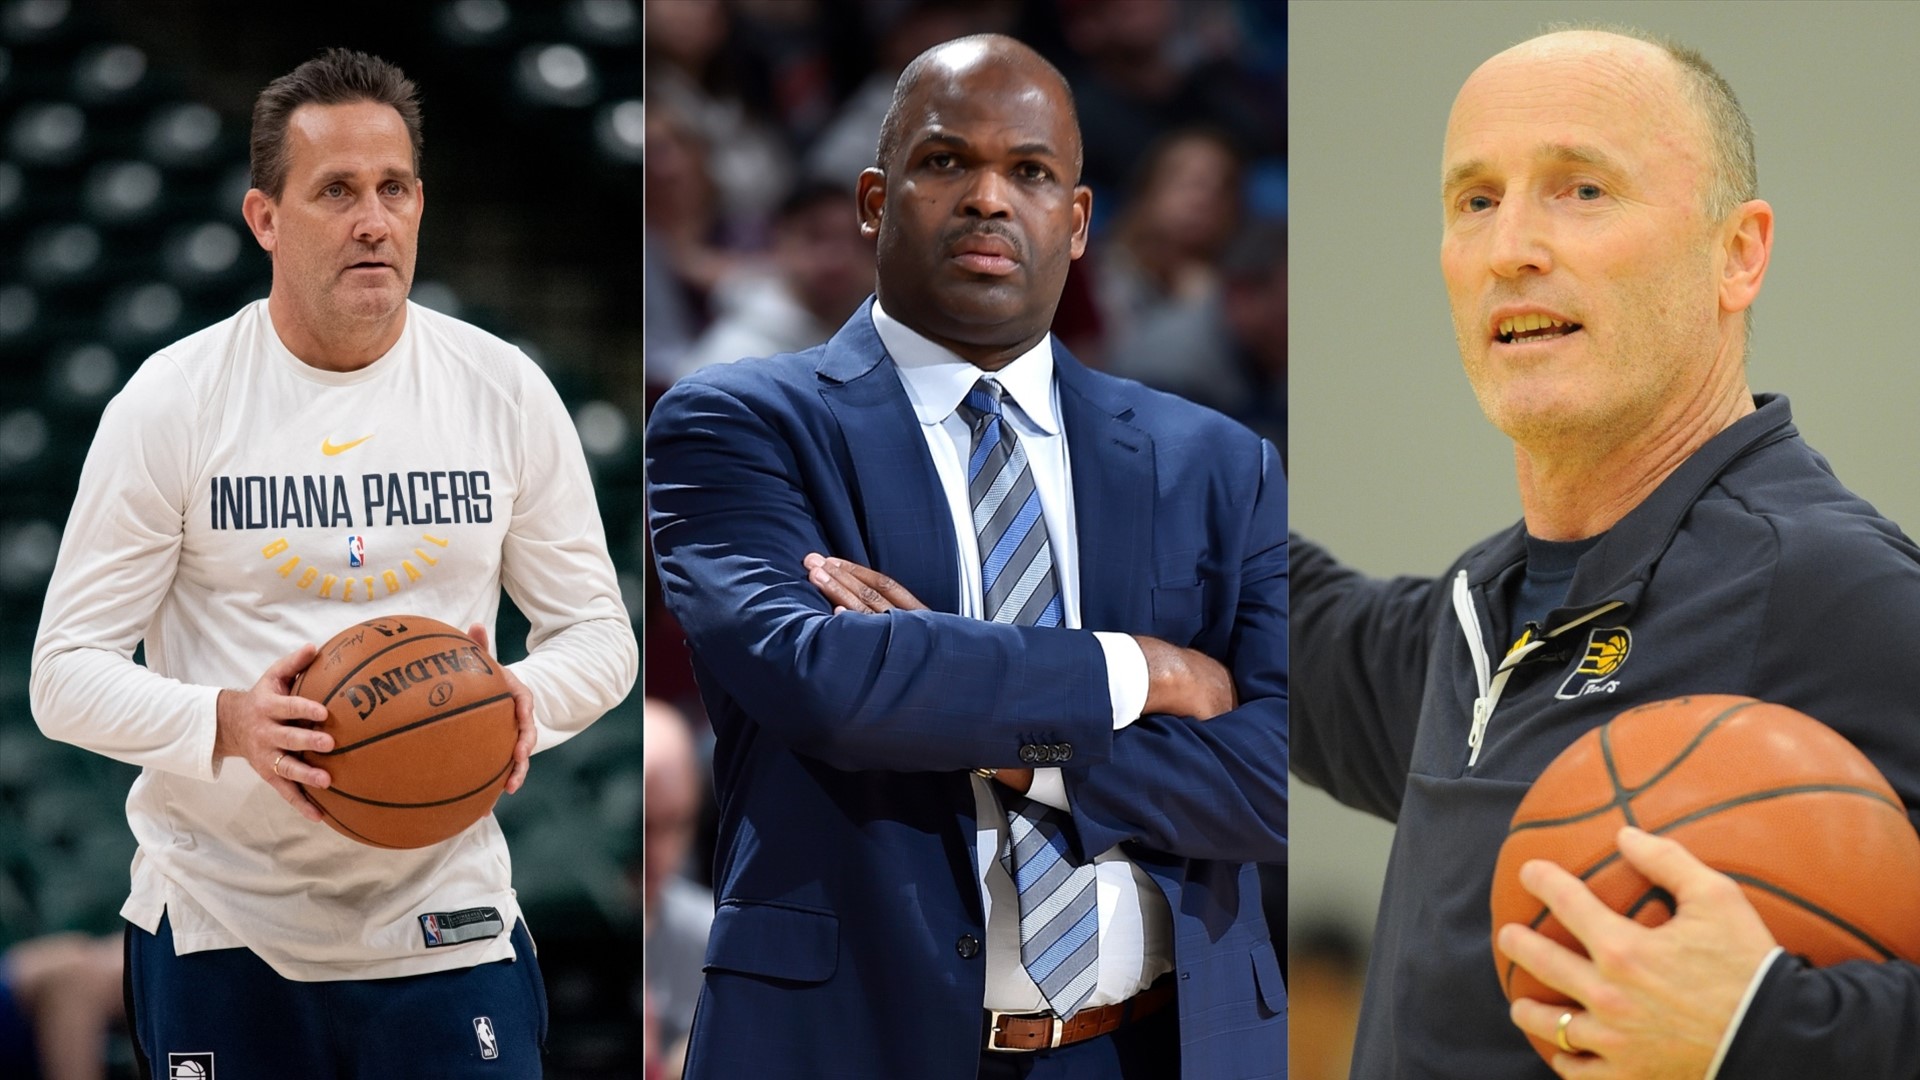 NBA India Games 2019 Indiana Pacers' coaching staff for the historic